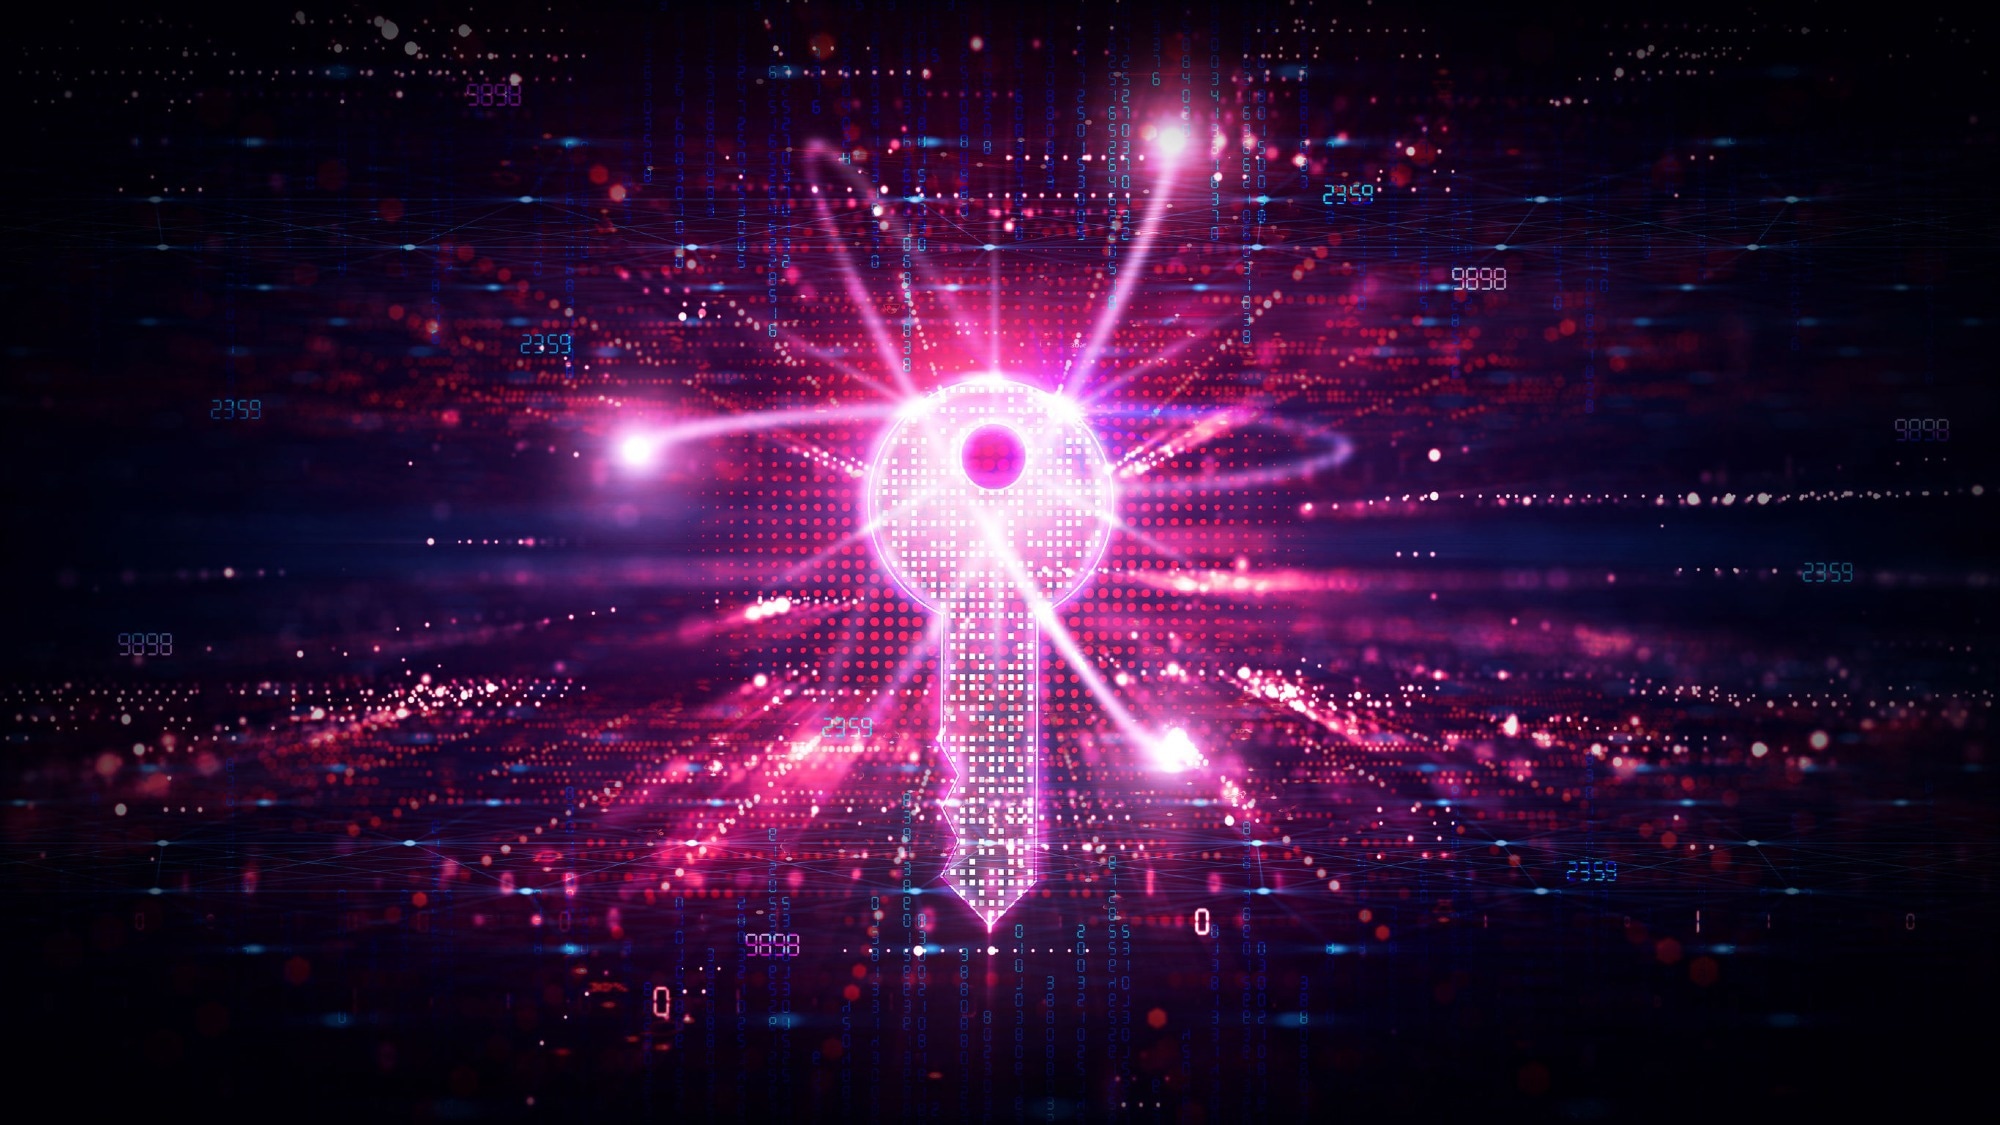 Thales Pioneers Post Quantum Cryptography with a Successful World-first Pilot on Phone Calls